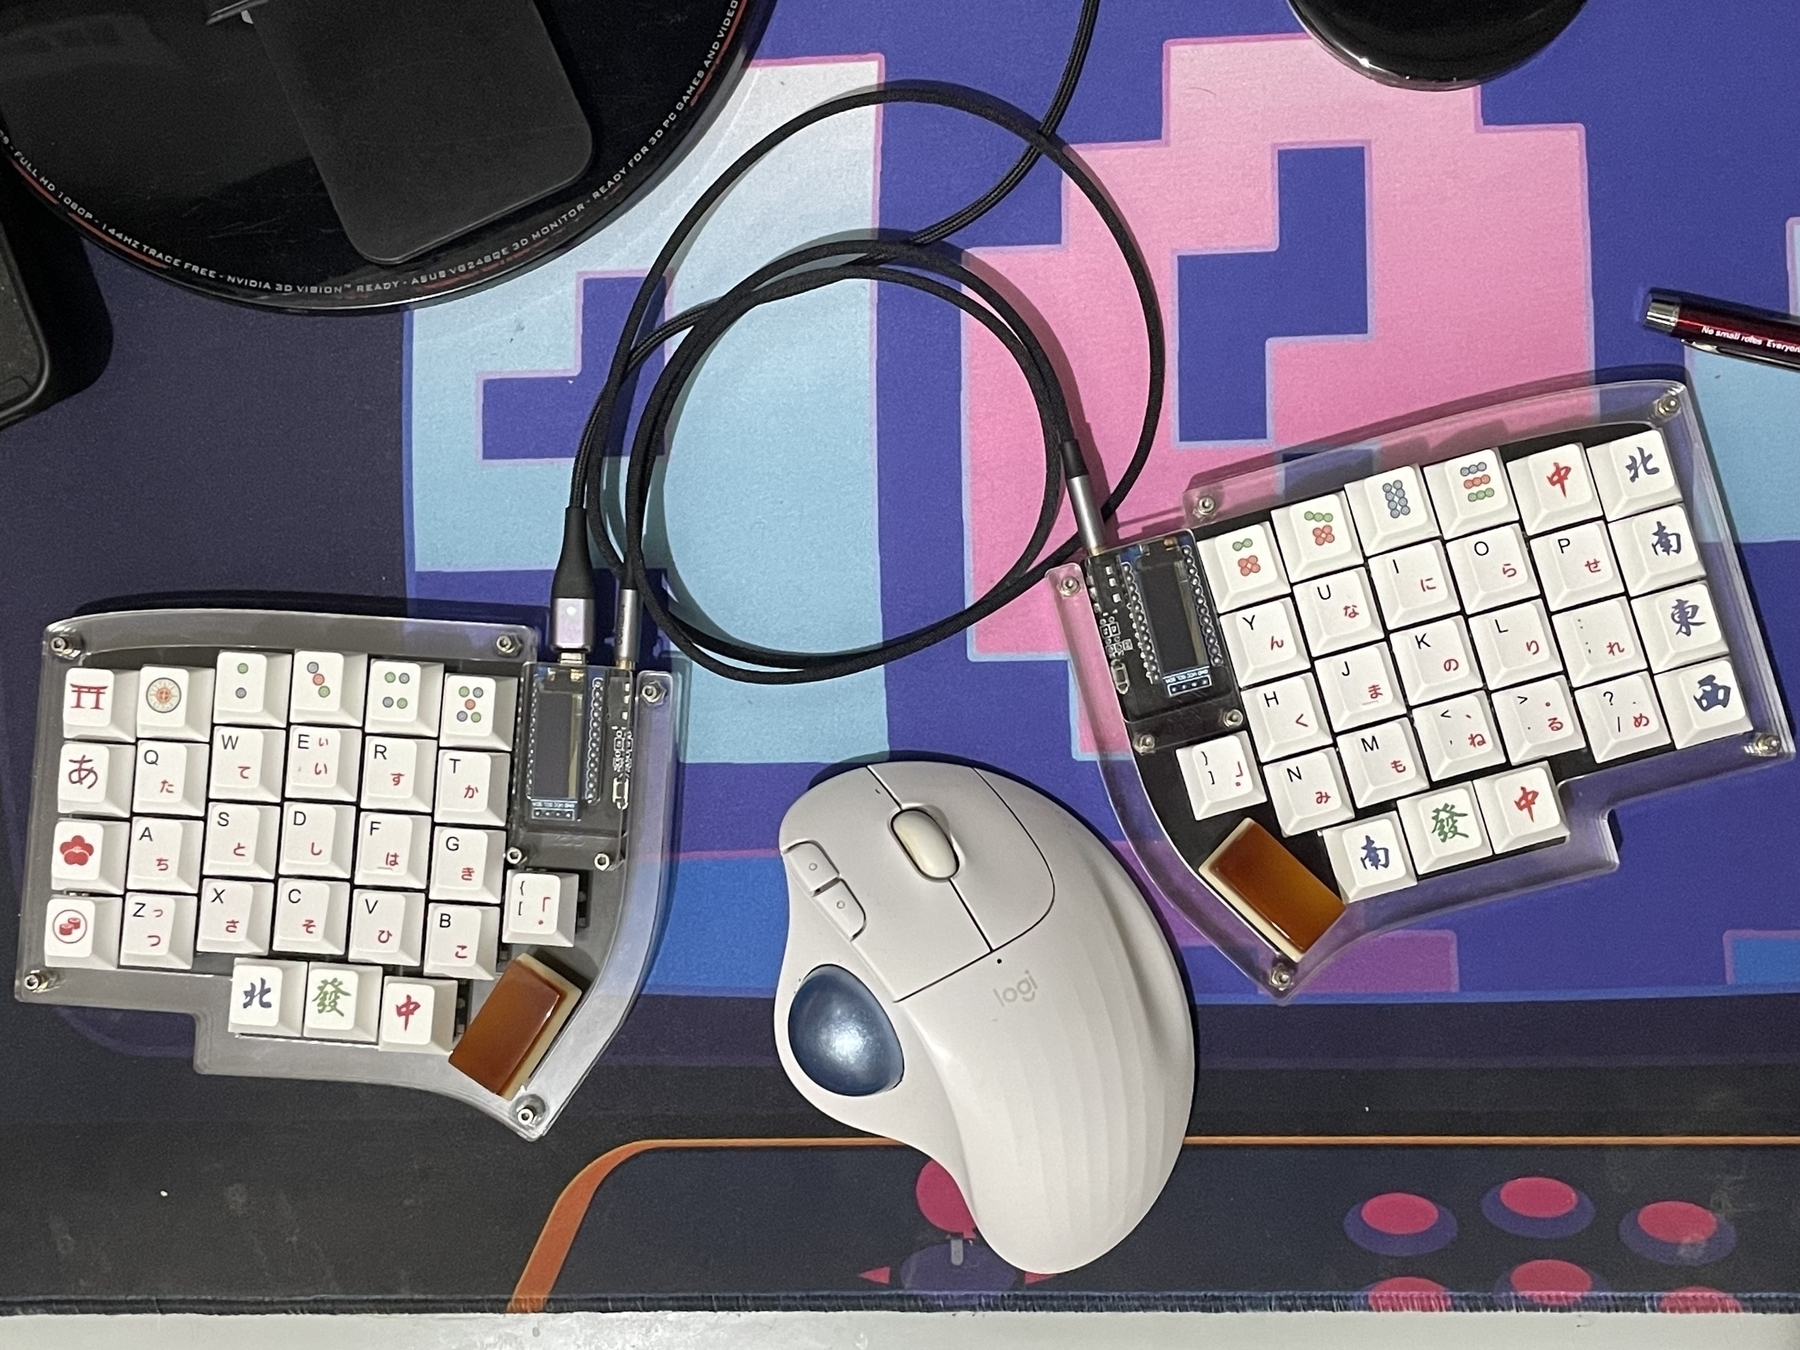 photo overlooking Chi’s Lily58 Pro split keyboard and her Logitech Ergo M575 trackball mouse placed between the split